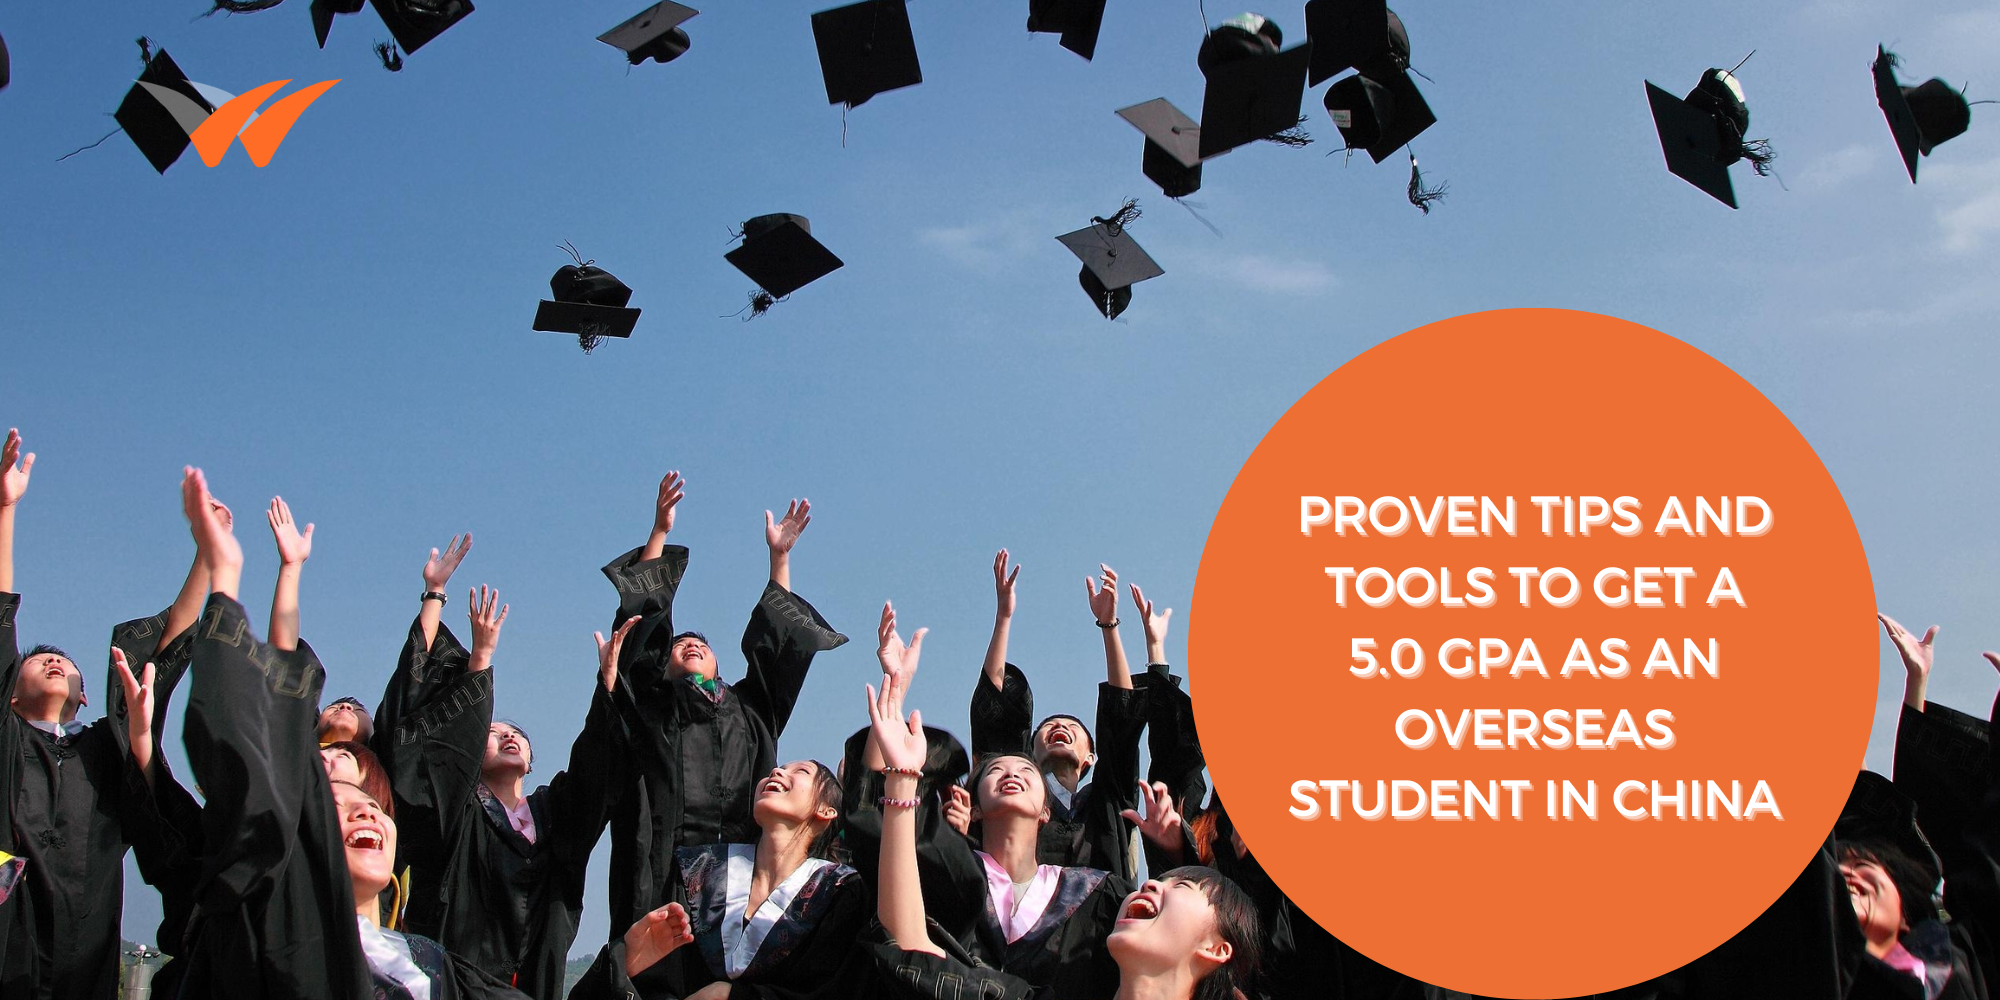 Proven Tips and Tools to Get a 5.0 GPA as an Overseas Student in China